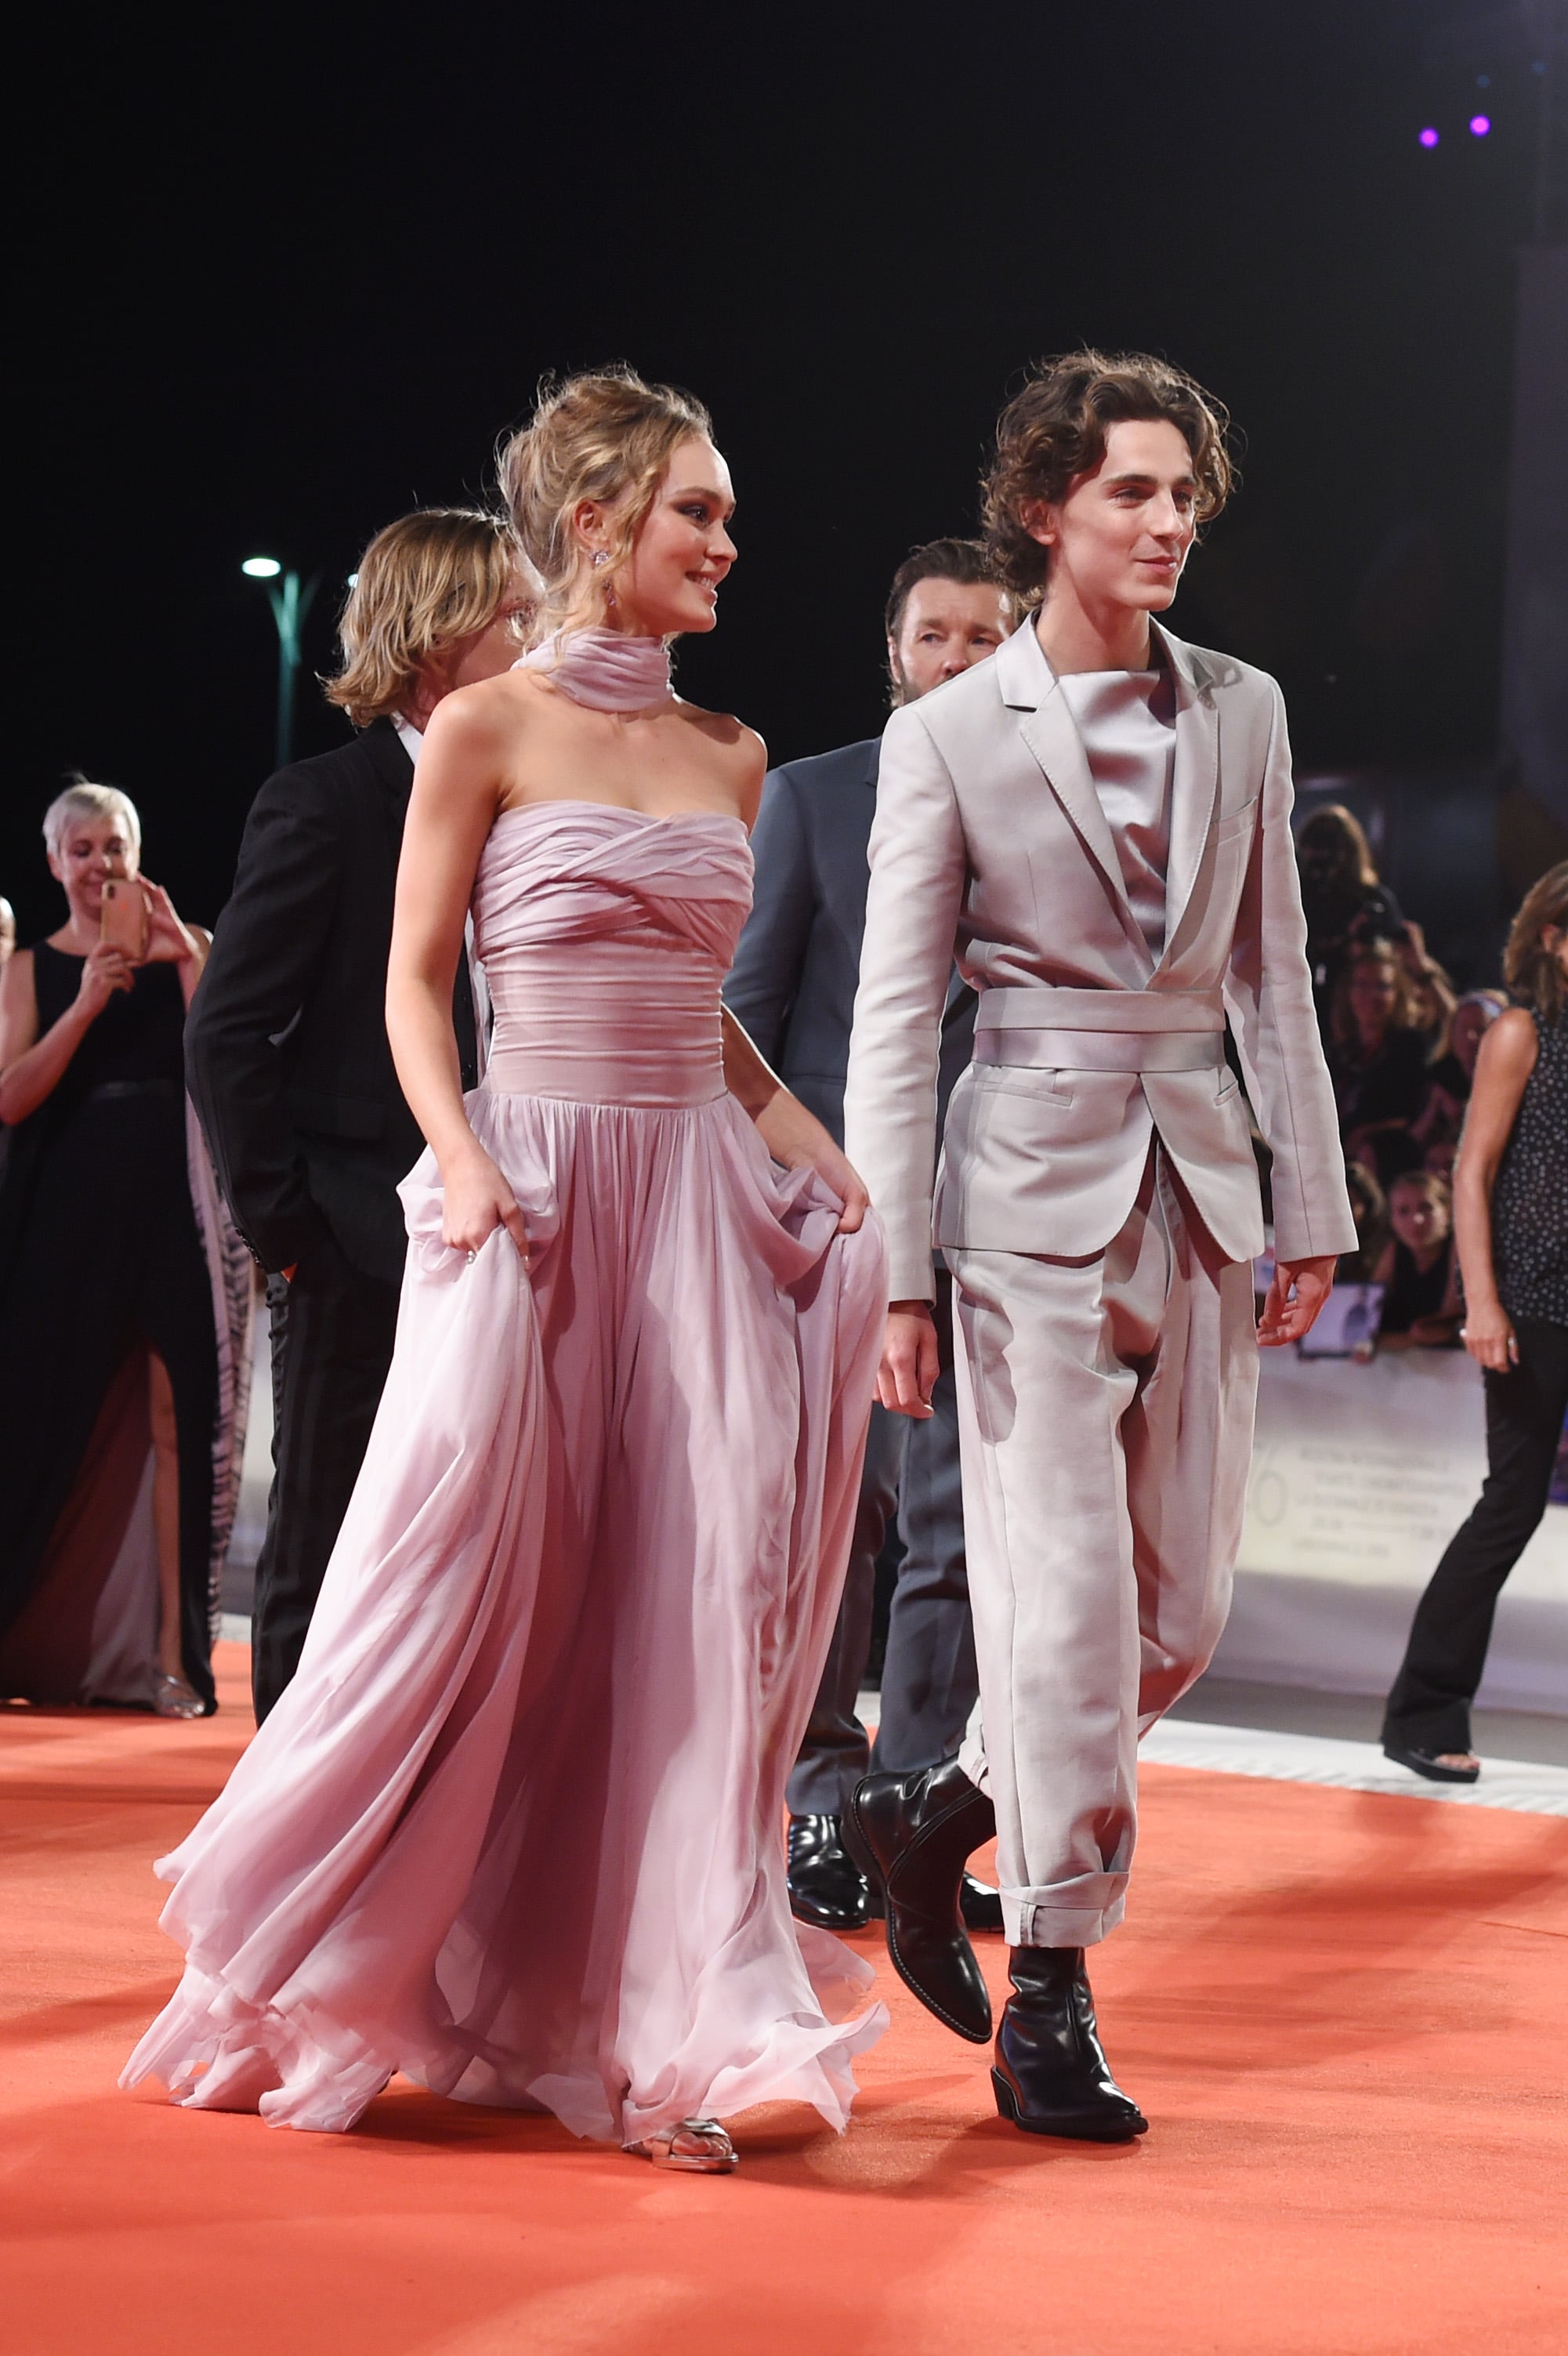 Timothee Chalamet and Lily-Rose Depp hit 'The King' red carpet